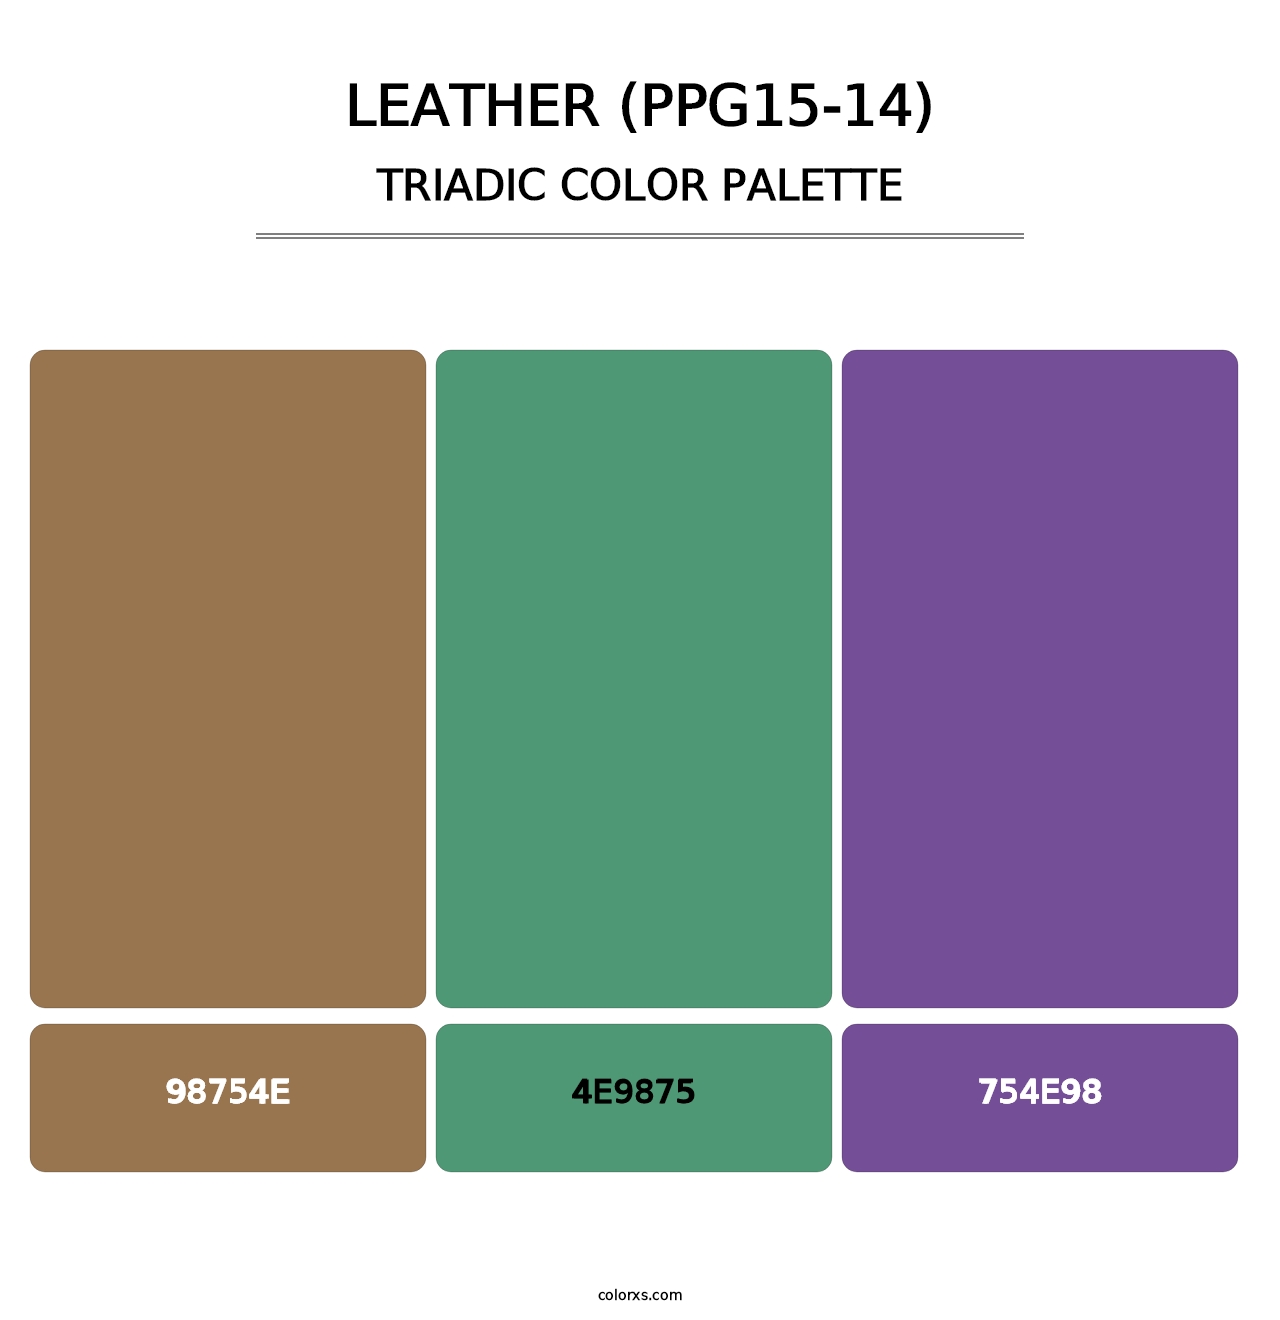 Leather (PPG15-14) - Triadic Color Palette